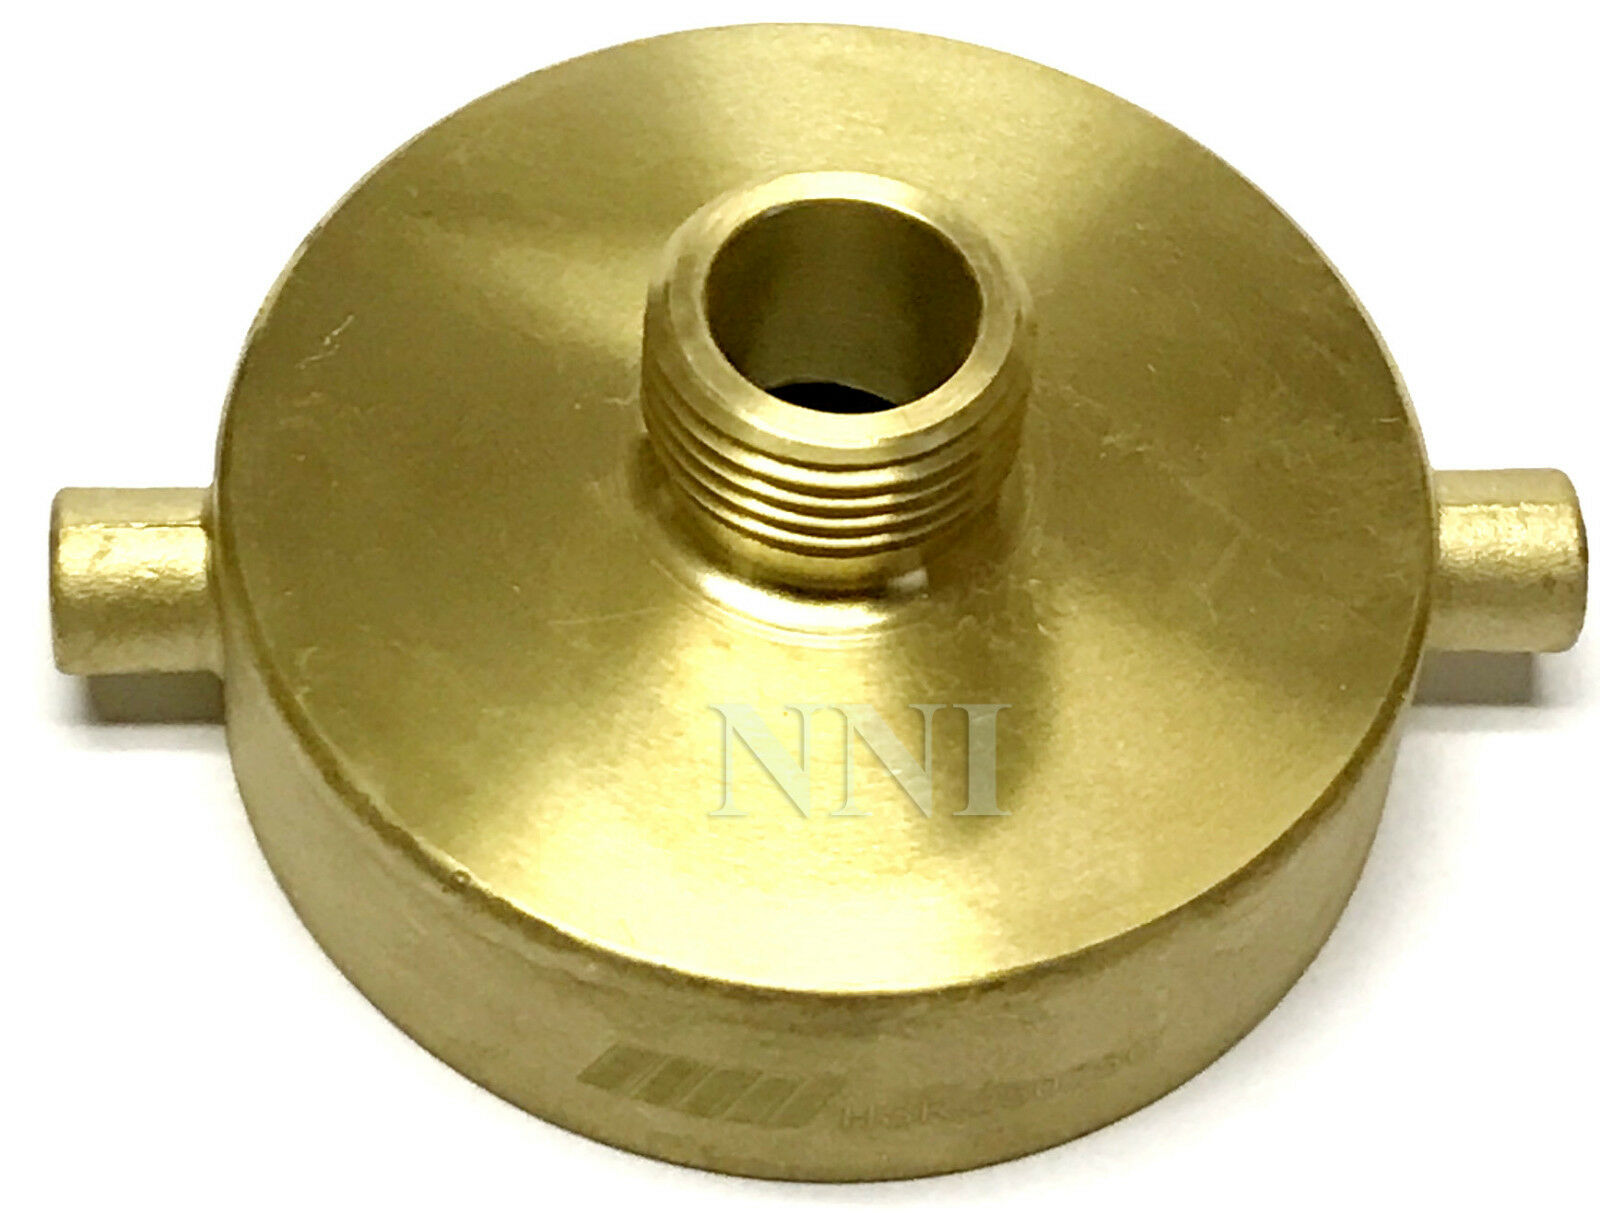 NNI Fire Hydrant Adapter 2-1/2 Female NST-NH x 3/4 Male GHT Garden Hose